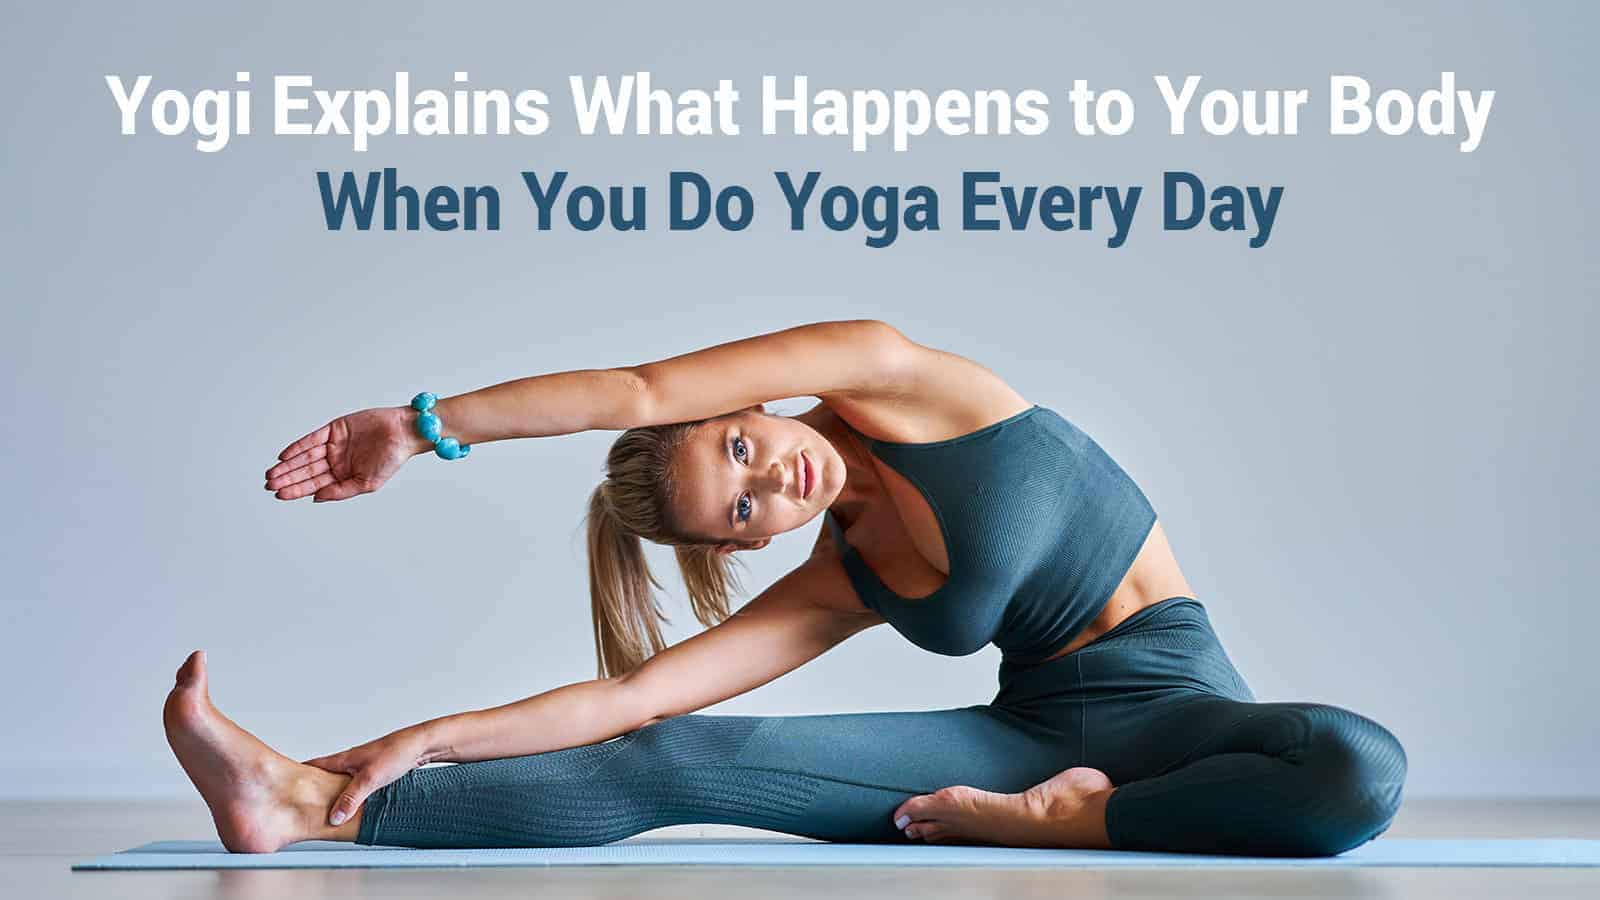 Yogi Explains What Happens to Your Body When You Do Yoga Every Day